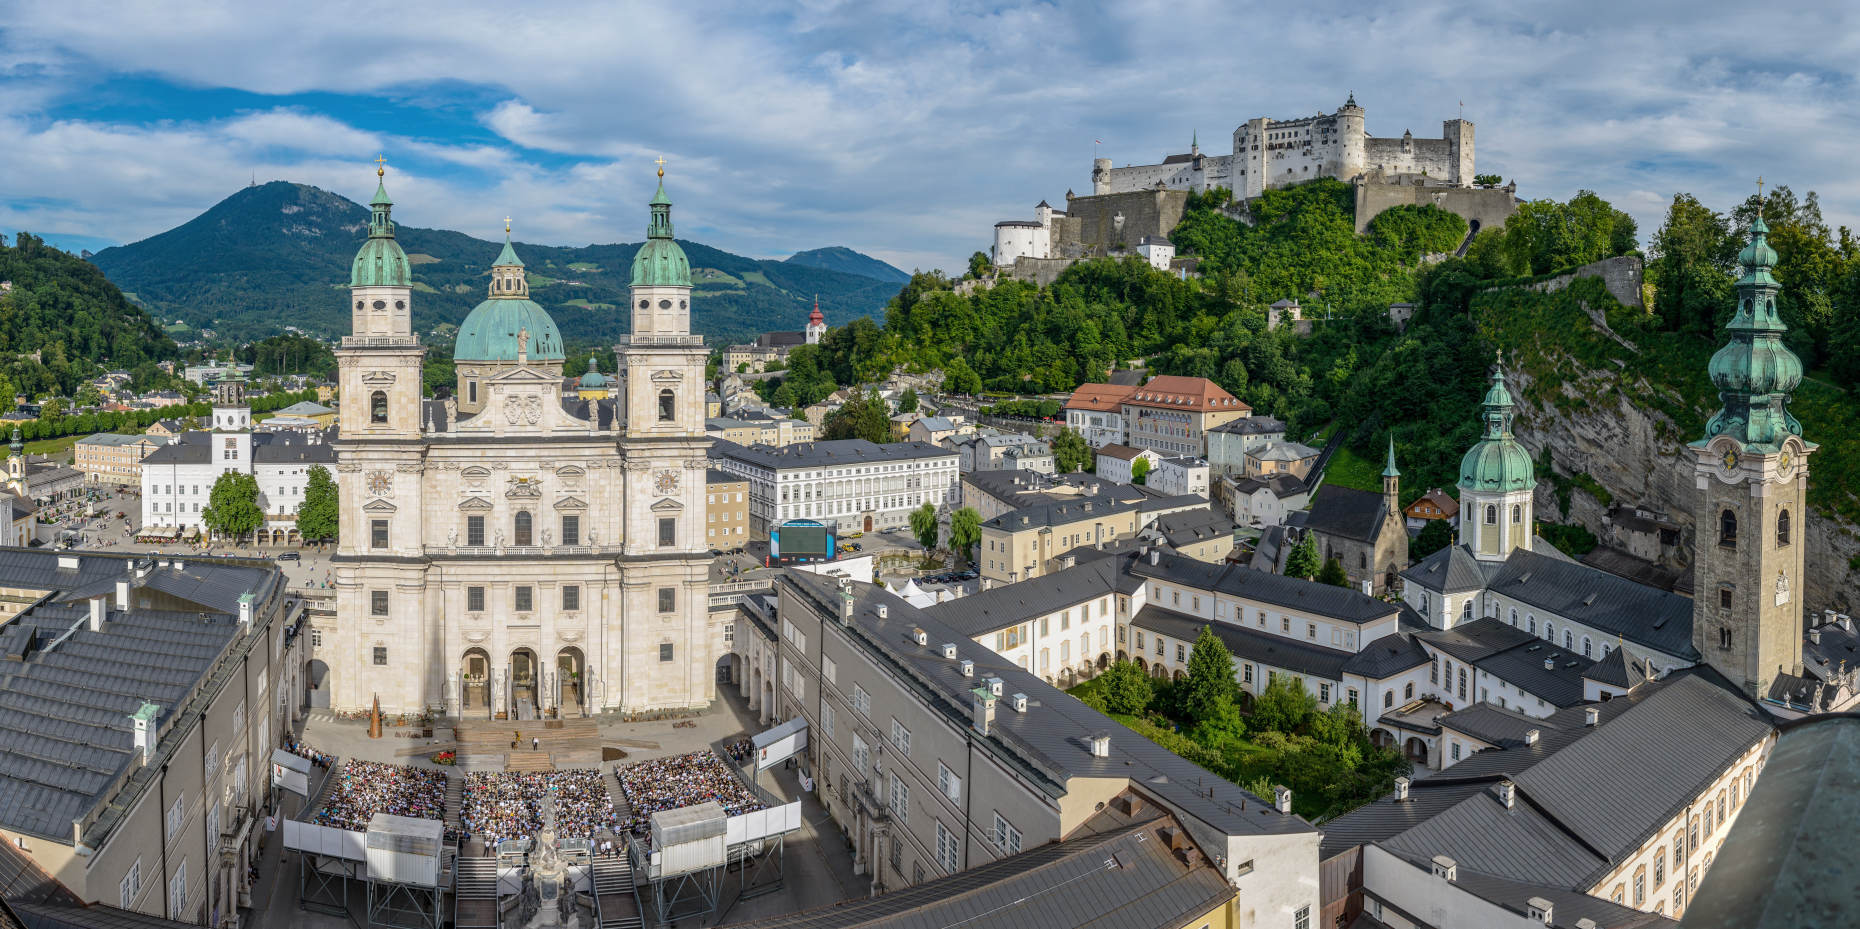 The Salzburg Festival the Stage of the World